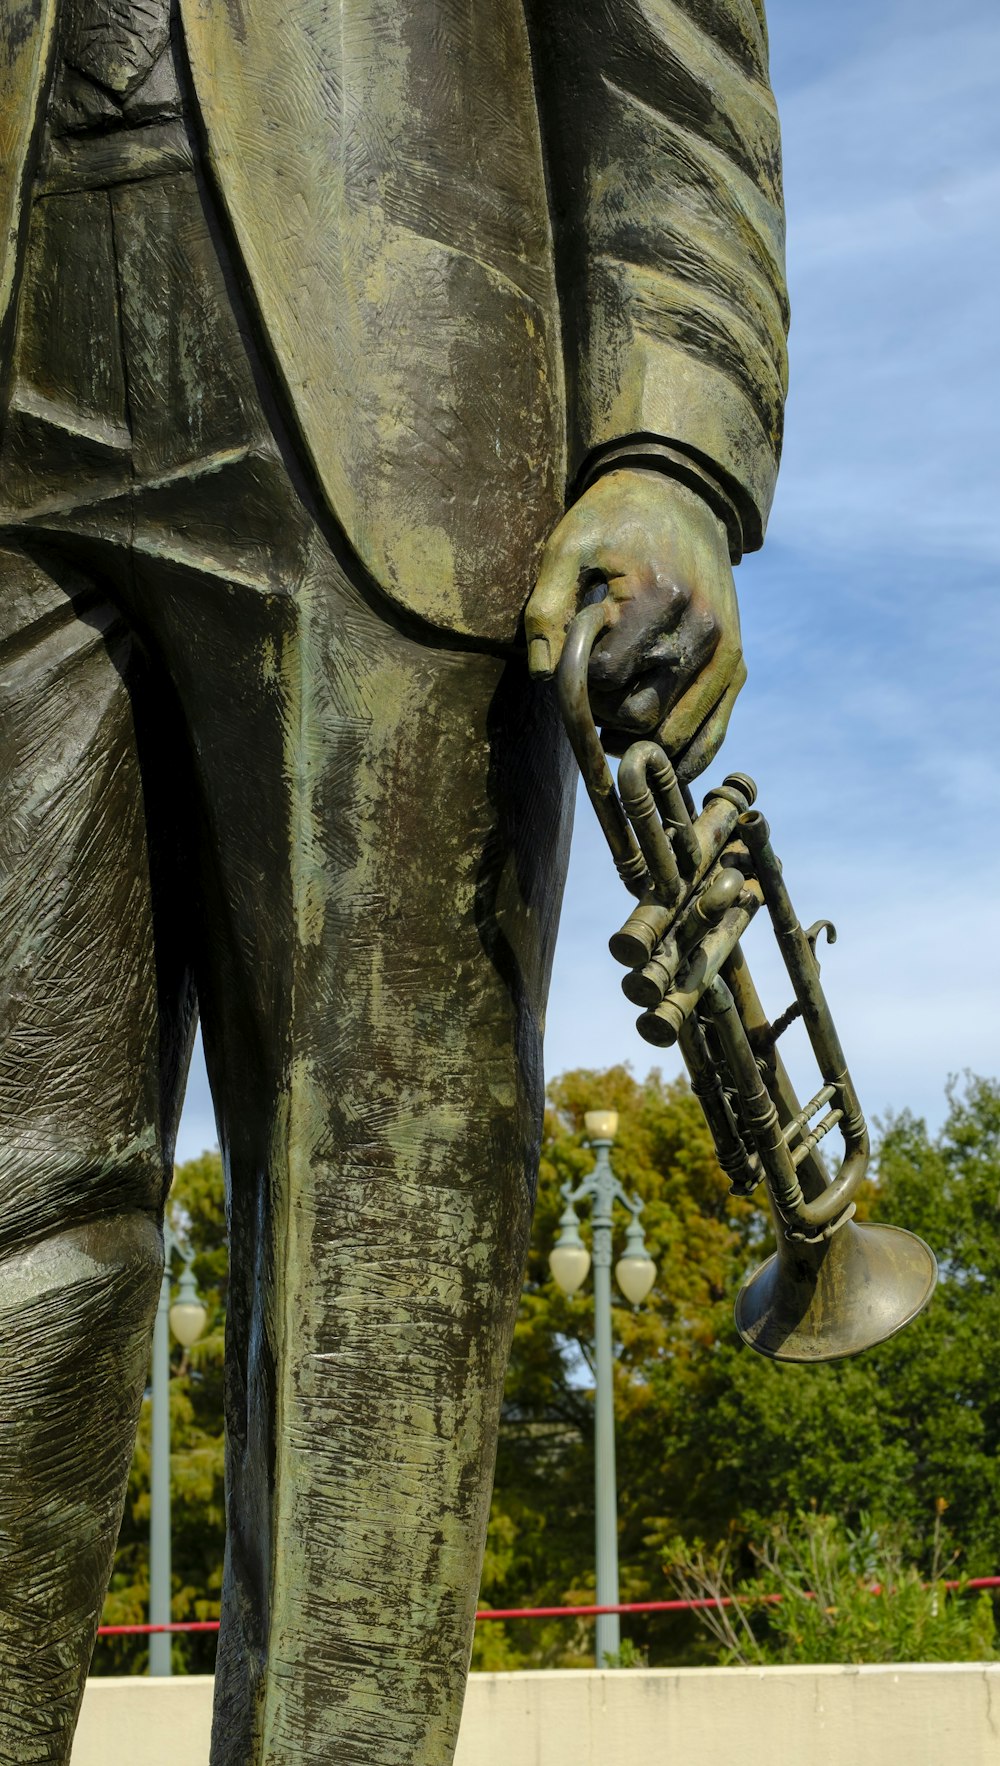 a statue of a man holding a trumpet